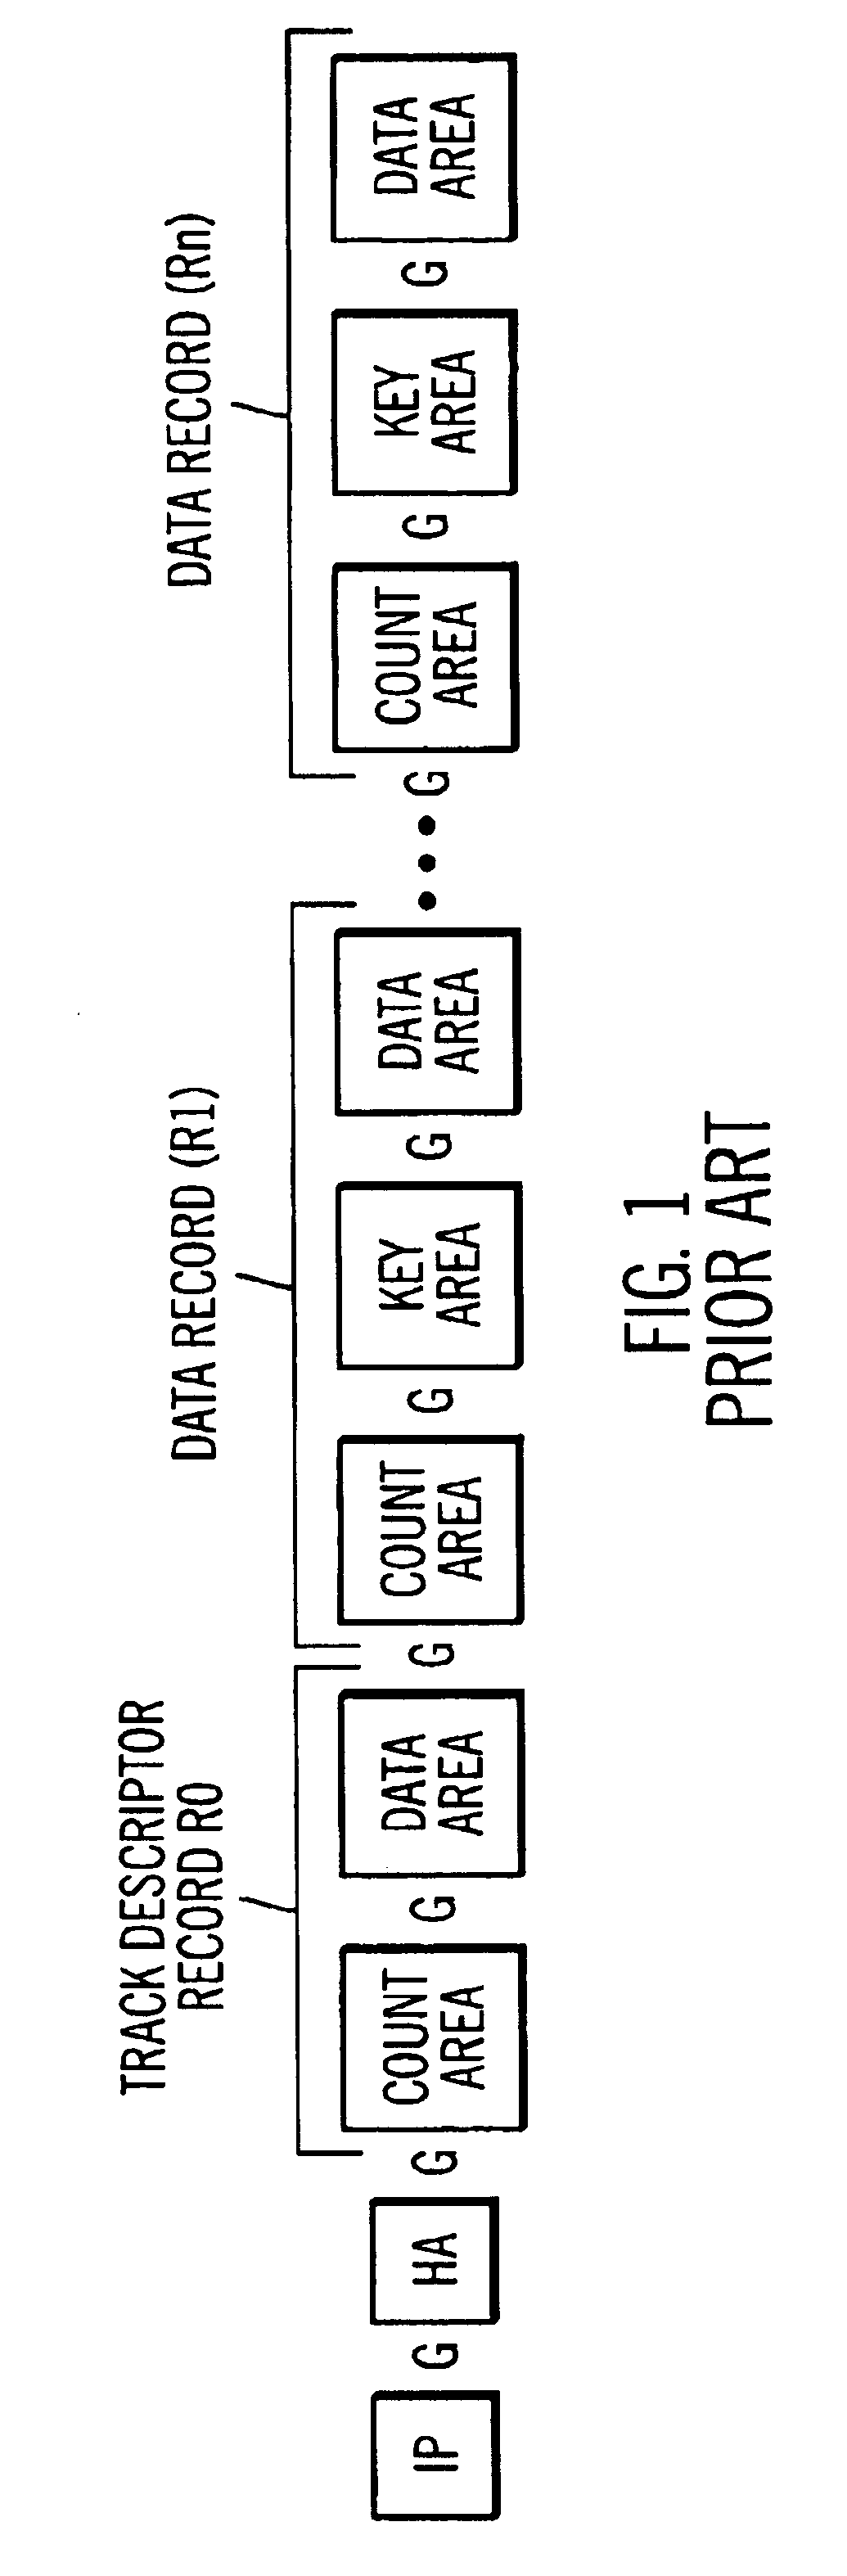 Method, system, and data structures for superimposing data records in a first data format to memory in a second data format